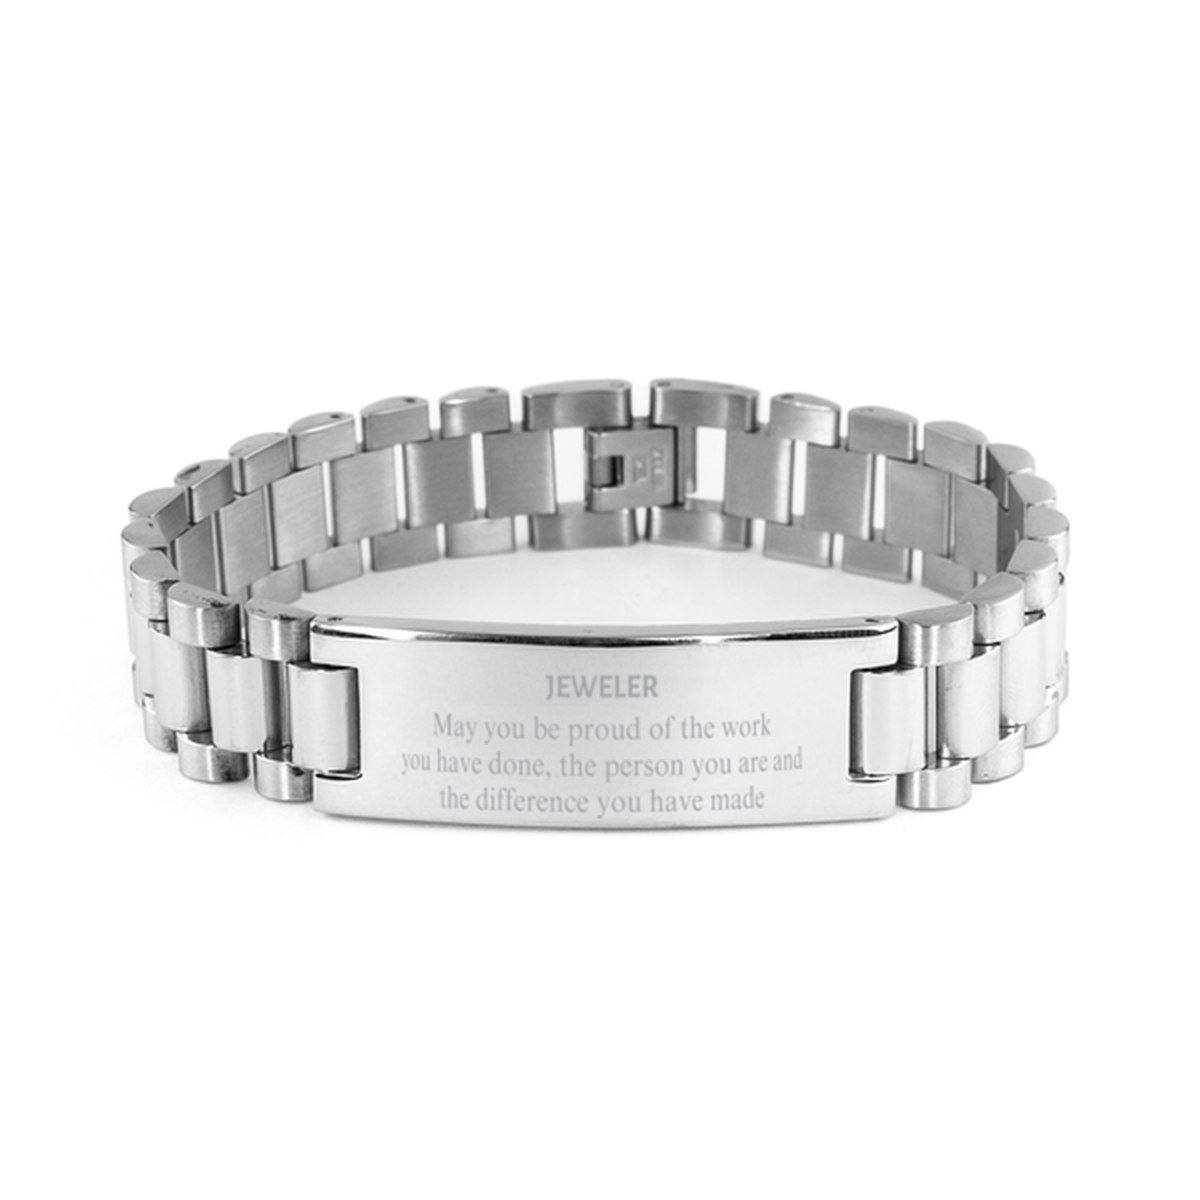 Jeweler May you be proud of the work you have done, Retirement Jeweler Ladder Stainless Steel Bracelet for Colleague Appreciation Gifts Amazing for Jeweler